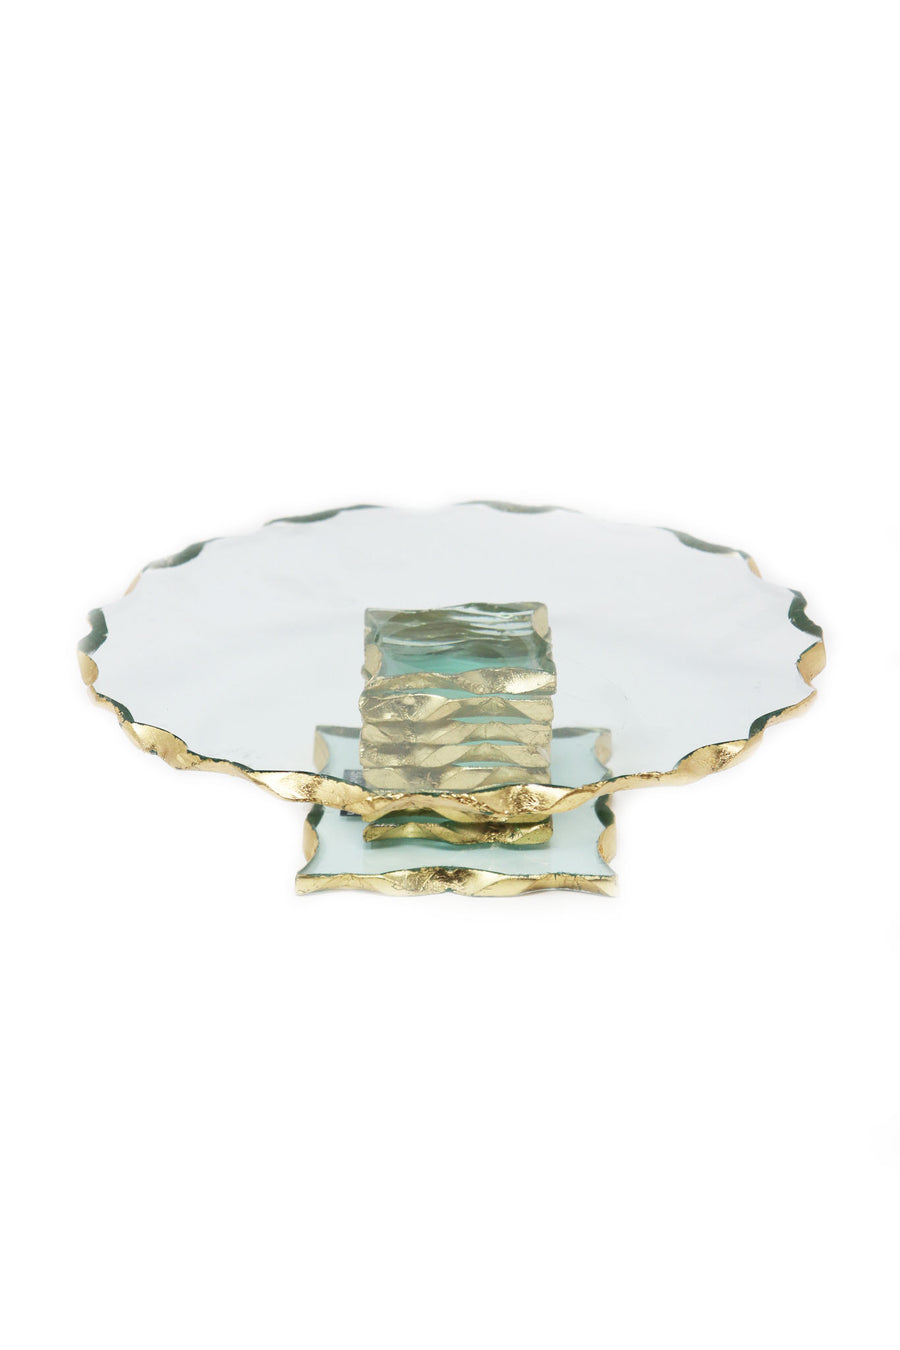 Chiseled Goldedge Handcrafted 9" Cake Stand - Gabrielle's Biloxi